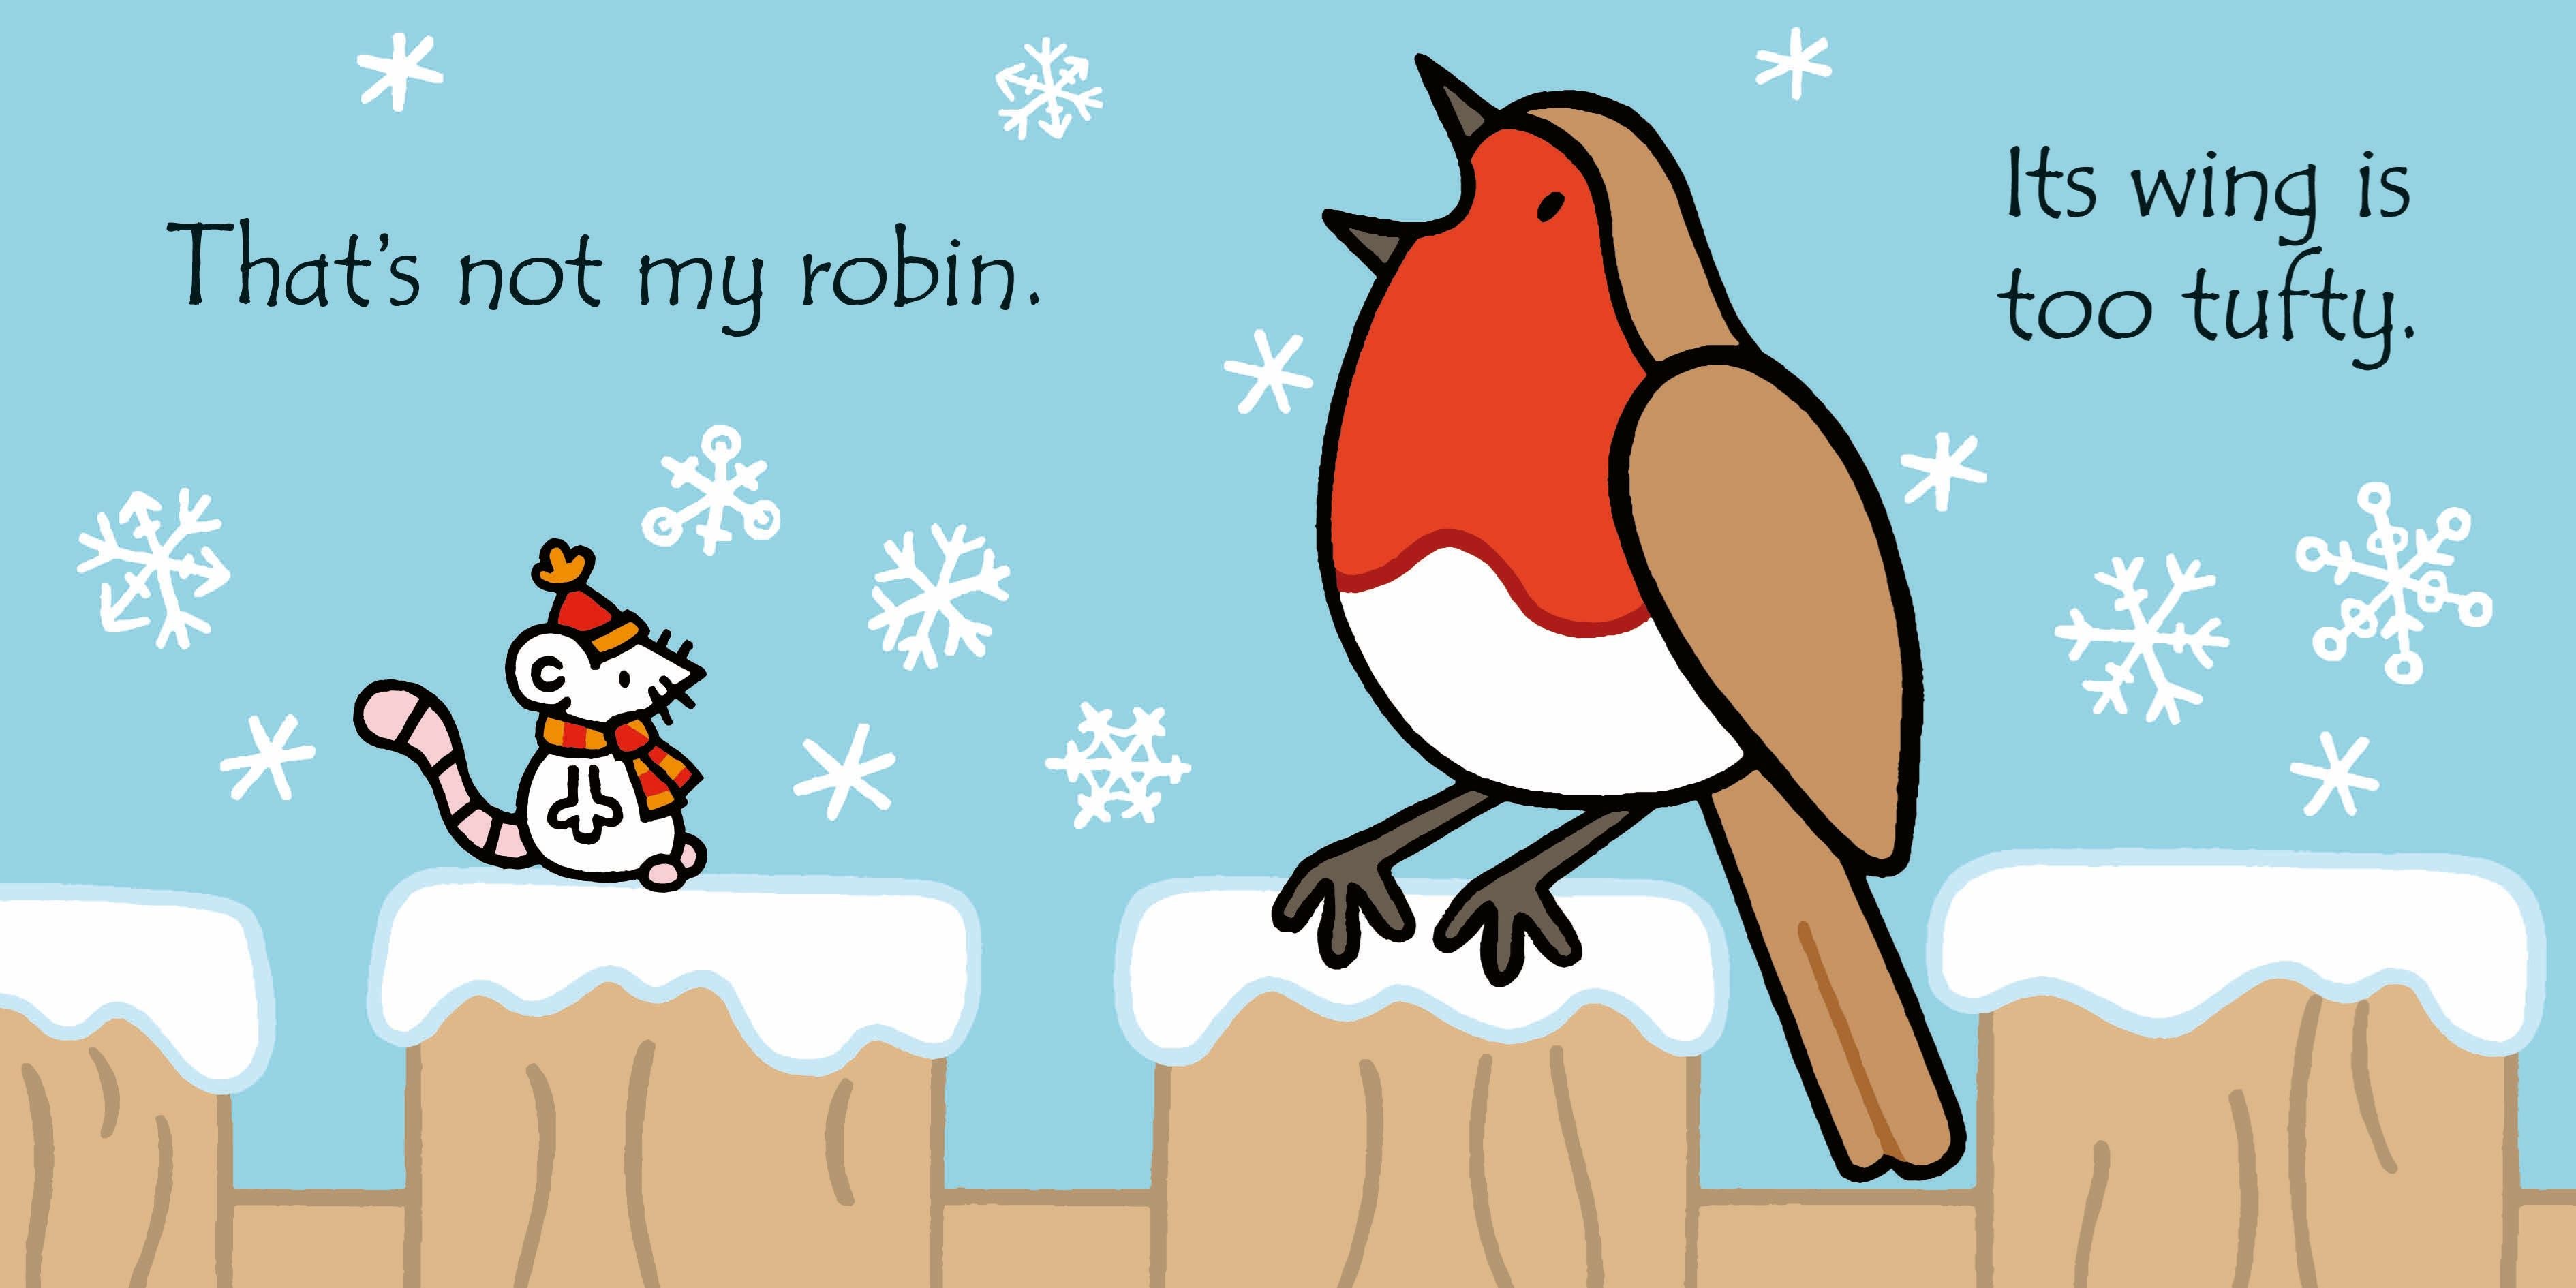 THAT'S NOT MY ROBIN (TOUCHY FEELY)